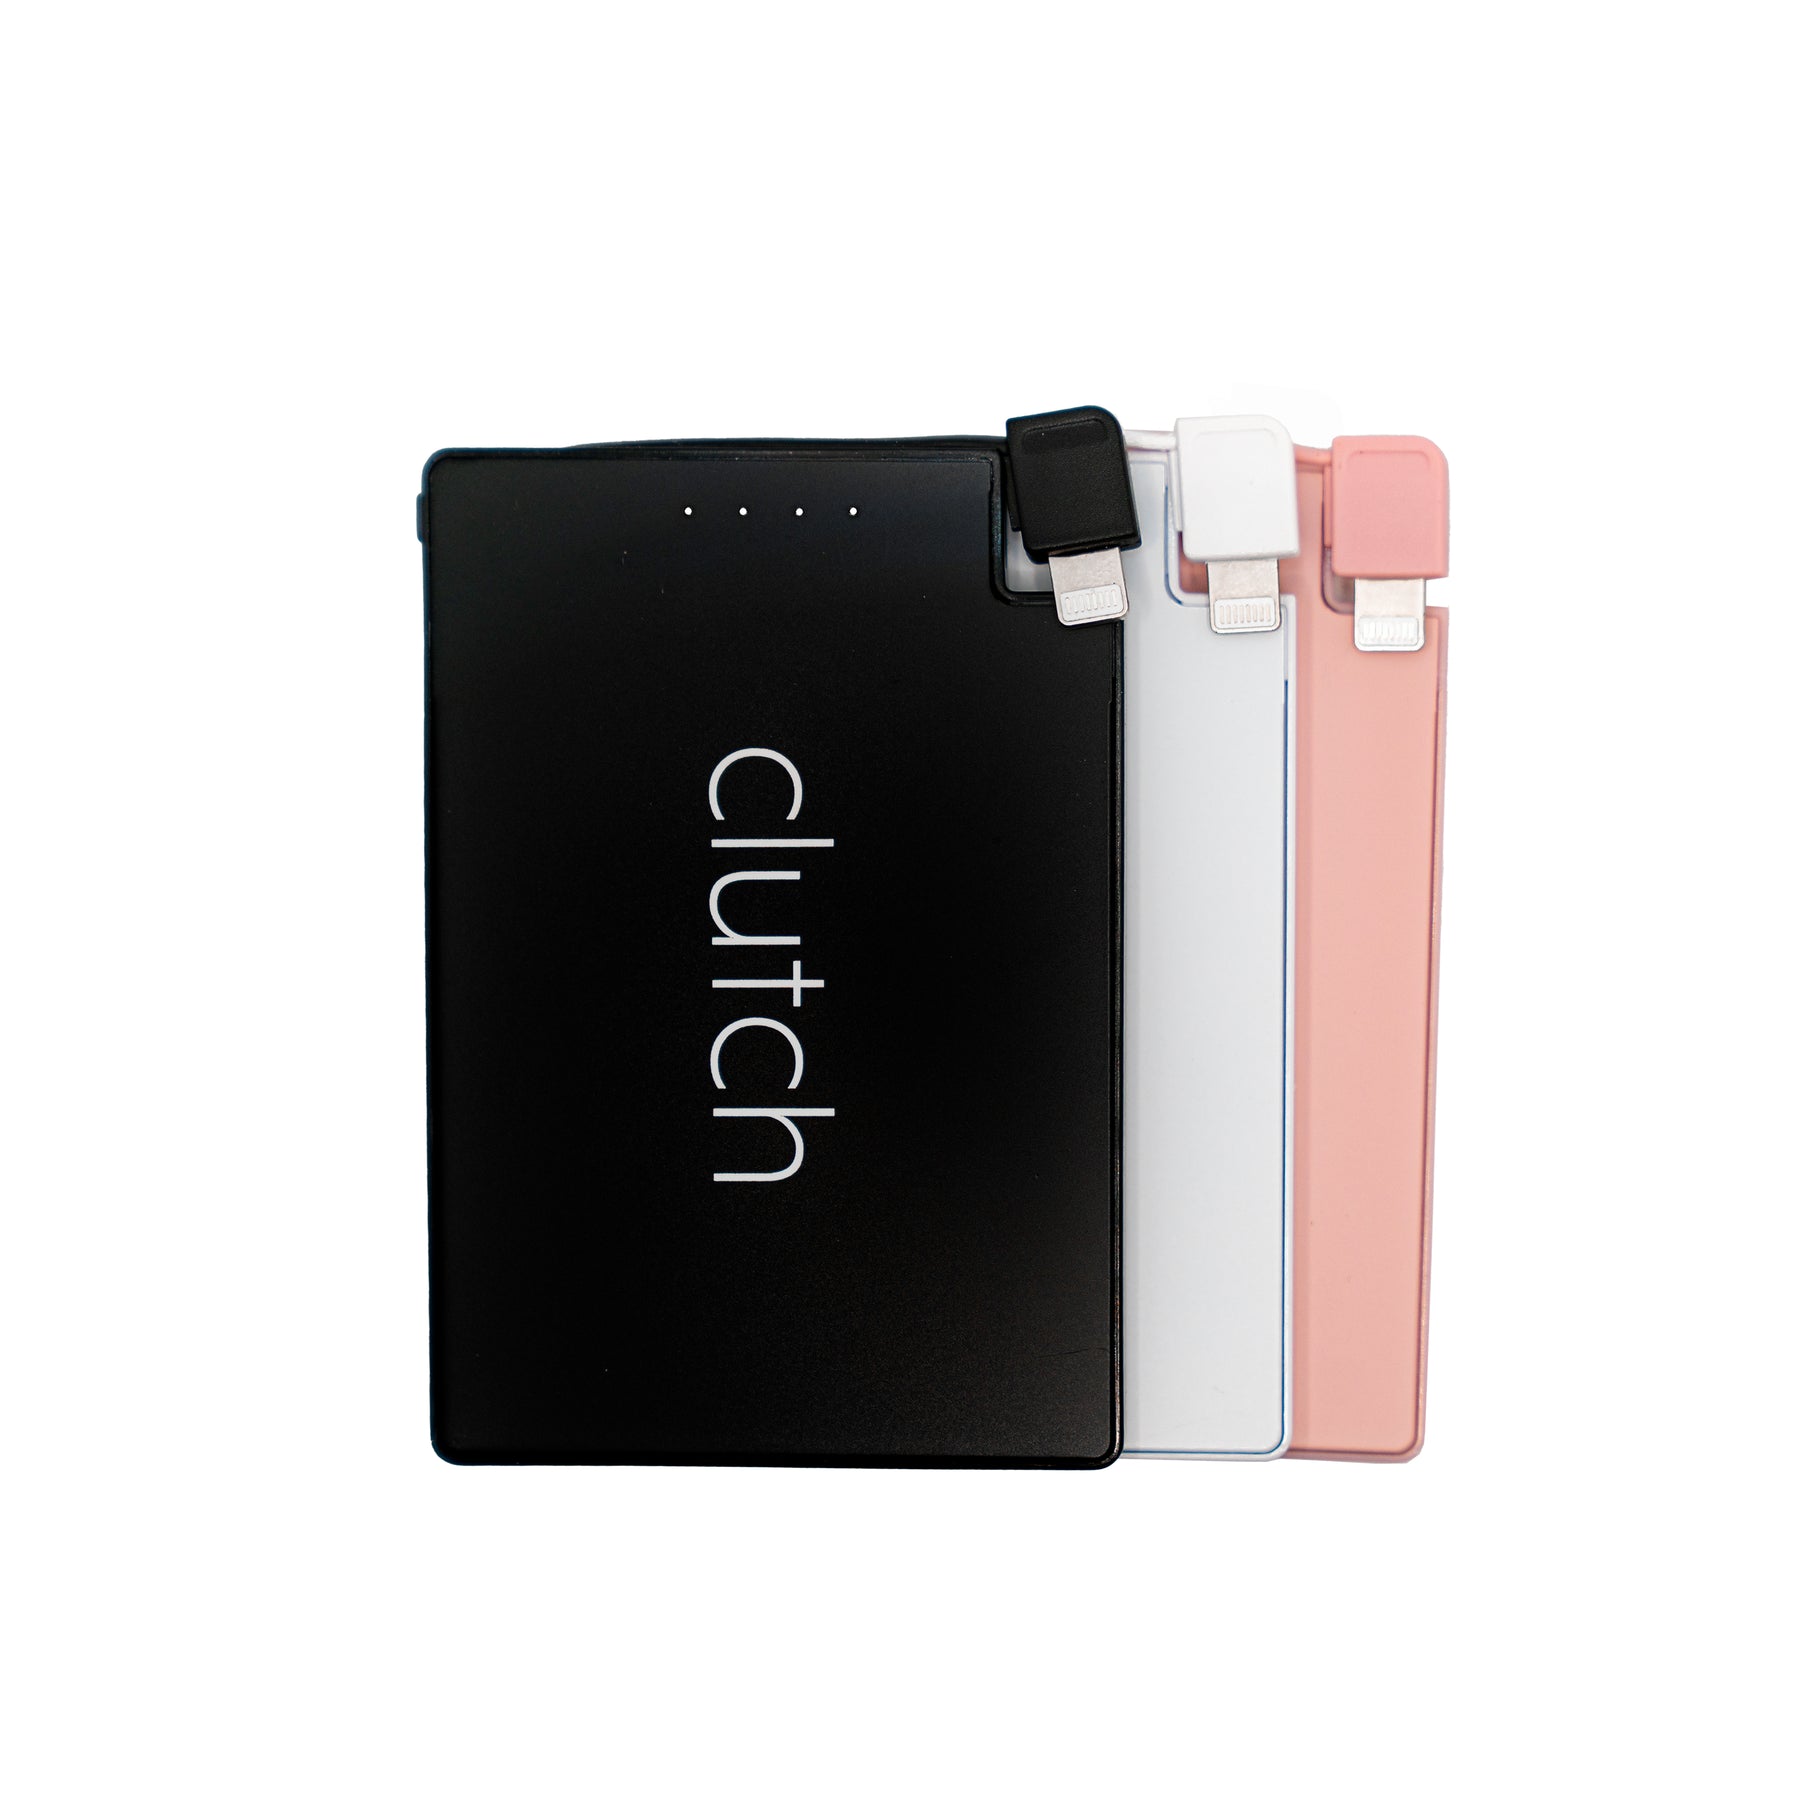 andere Giotto Dibondon Arabische Sarabo Clutch Charger Lightning - World's Thinnest Portable Phone Charger & Power  Bank